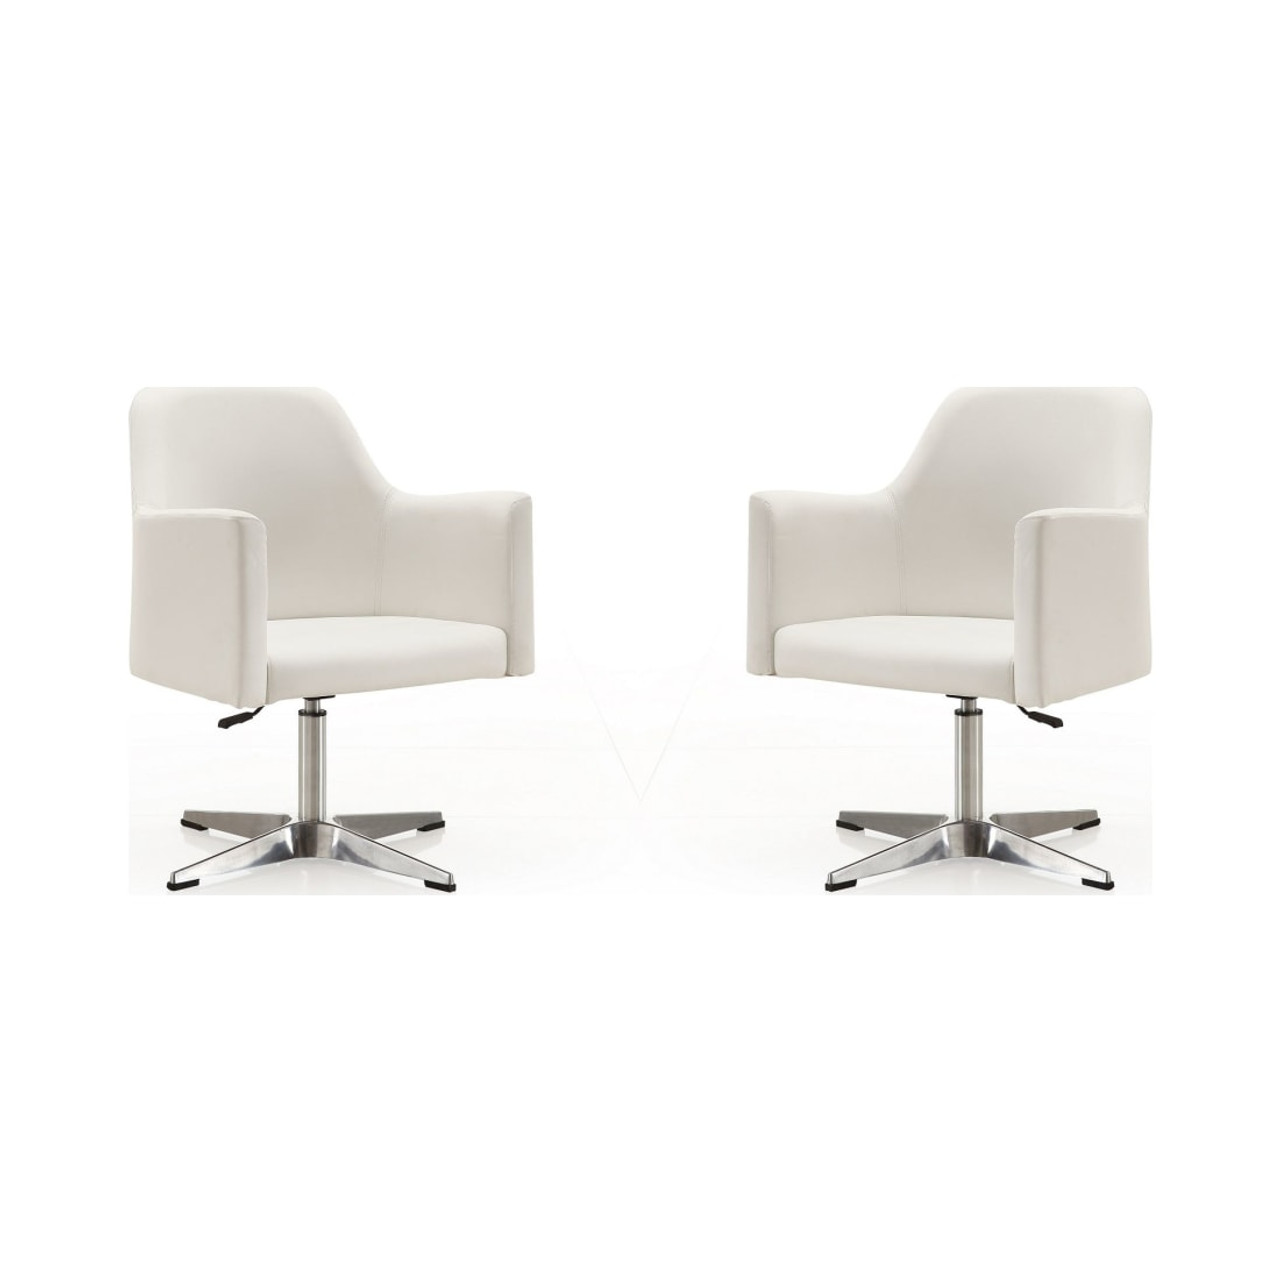 Pelo Adjustable Height Swivel Accent Chair in White and Polished Chrome (Set of 2)